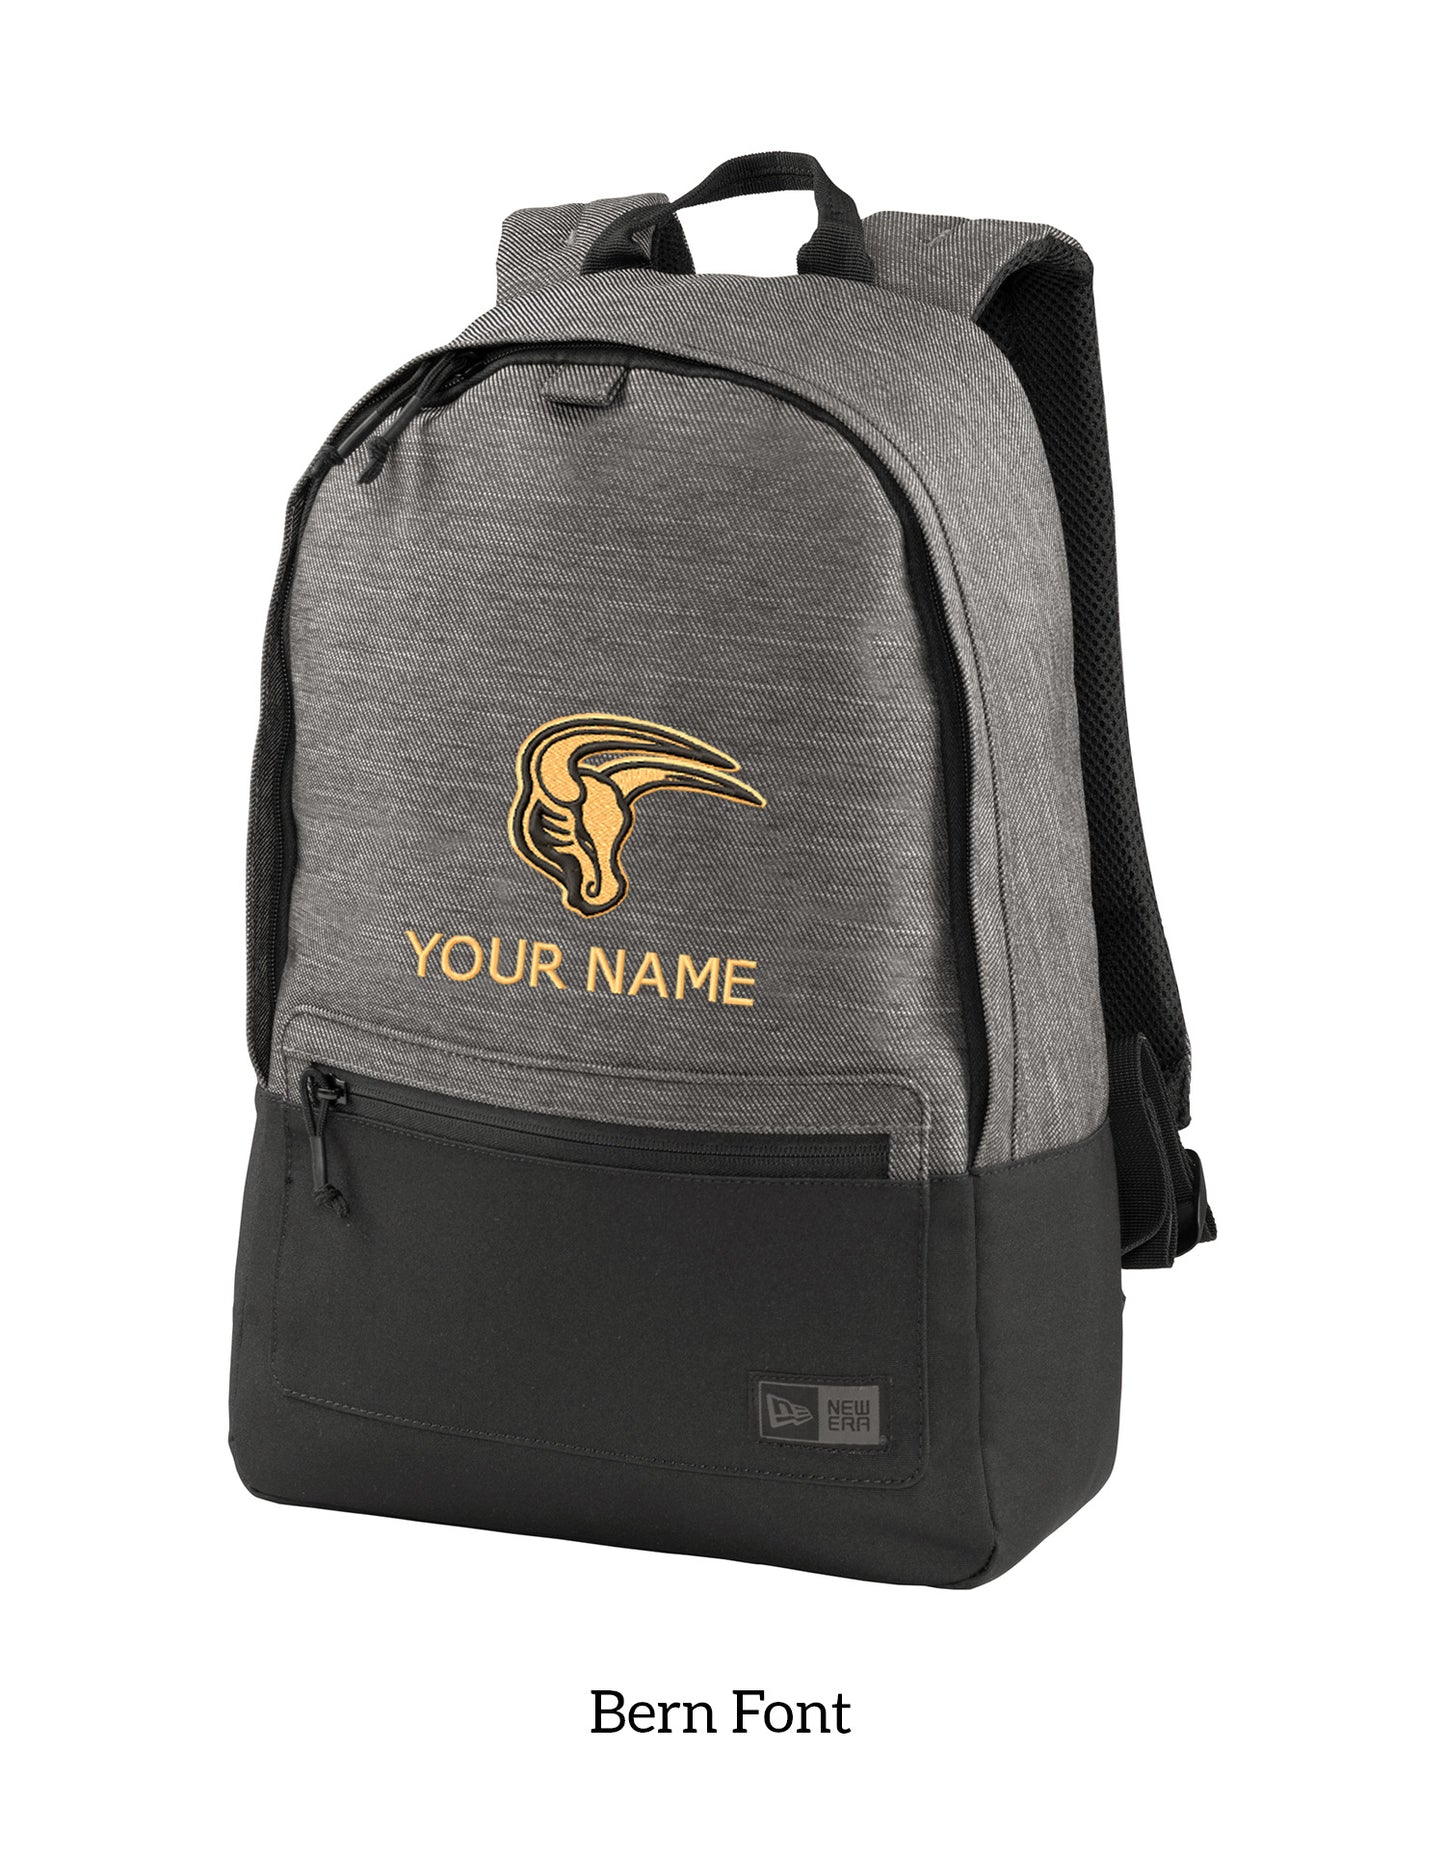 MSIS PTO-Maverick New Era Legacy Black and Grey Backpack with Embroidery Design, Personalize with your Name!